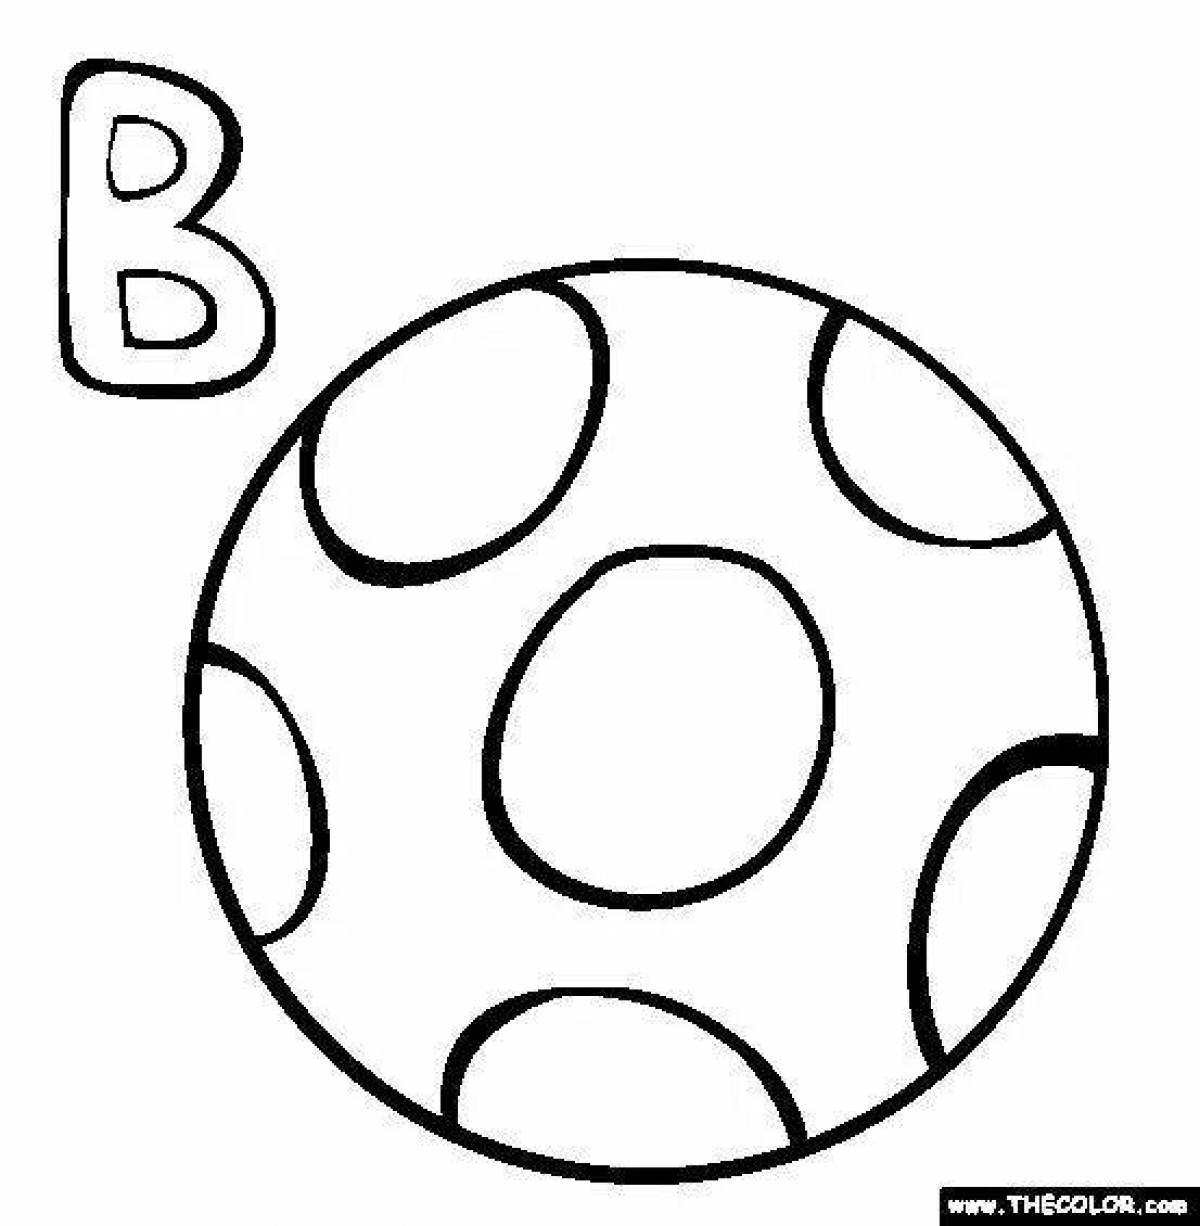 Coloring book with a ball for children 4-5 years old